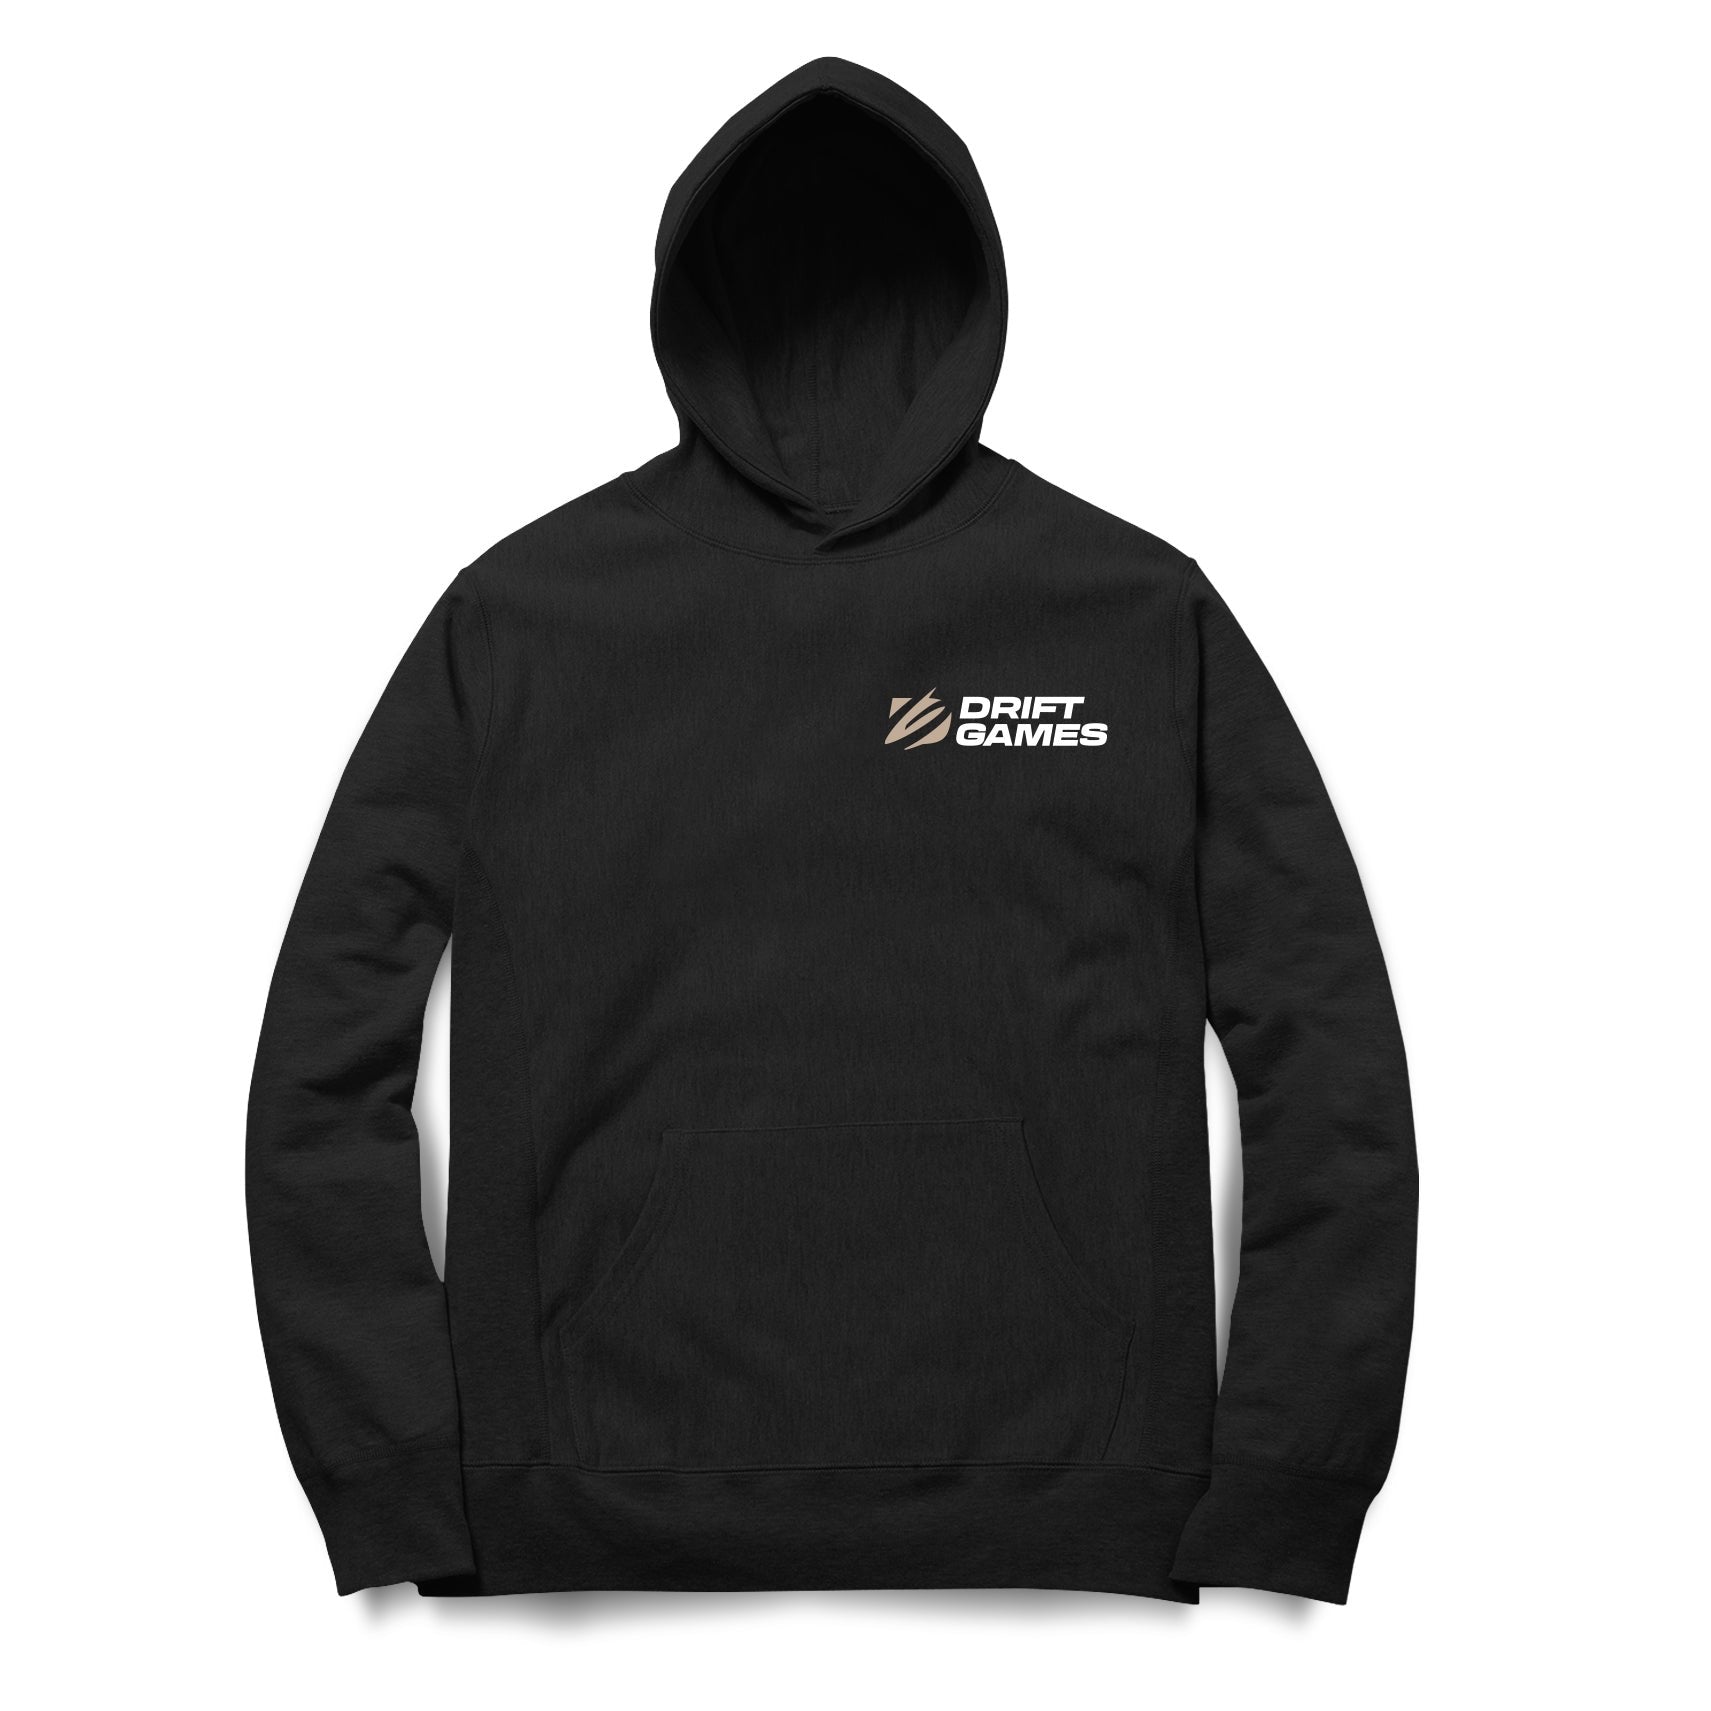 Projects Hoody